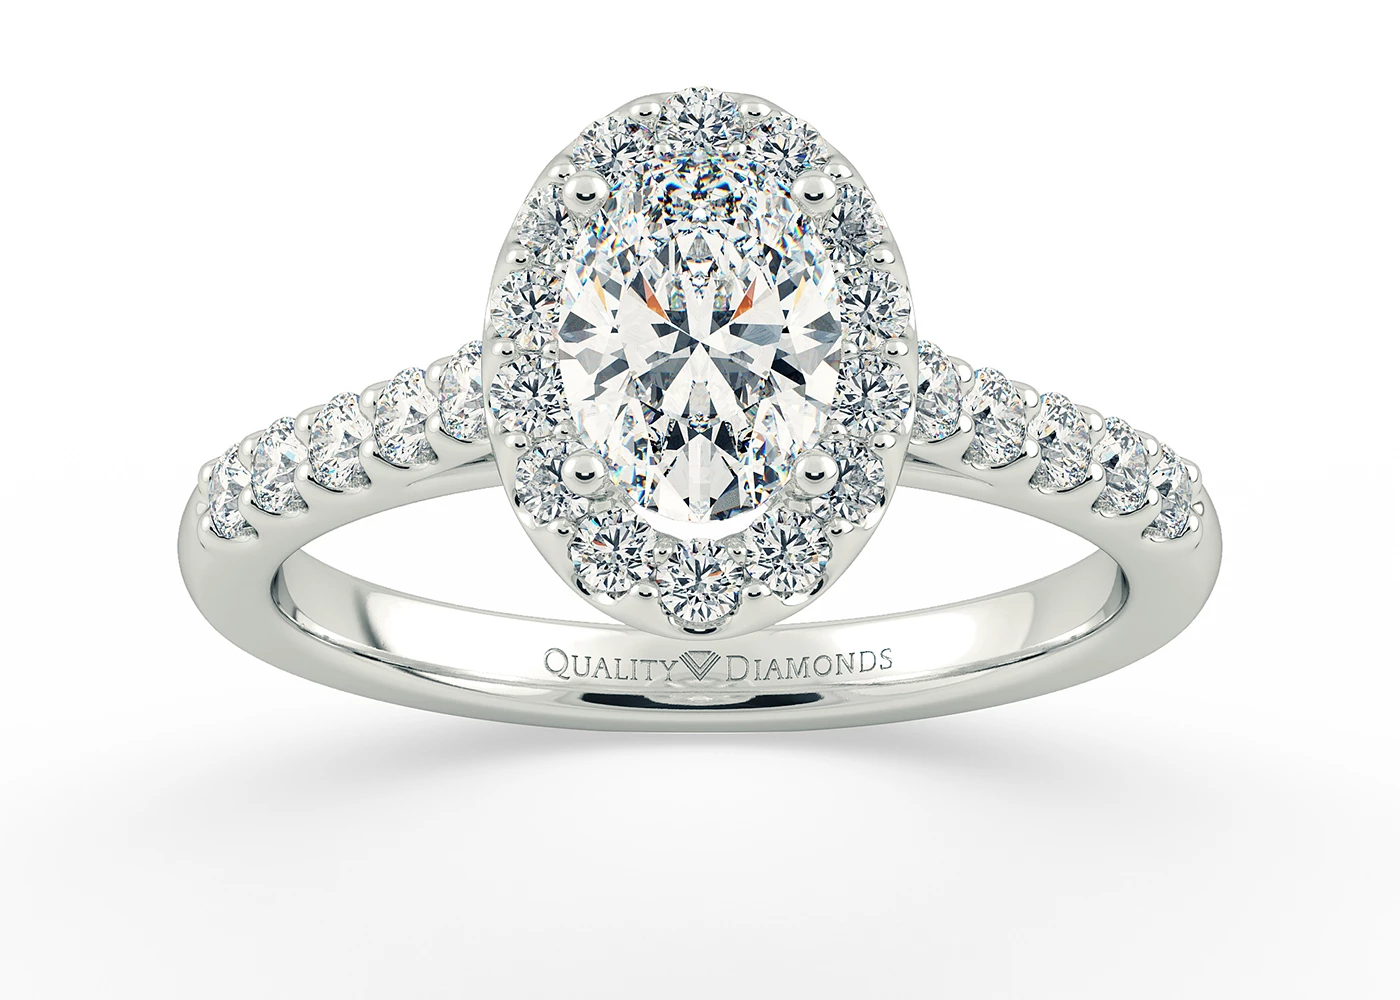 One Carat Oval Halo Diamond Ring in 18K White Gold